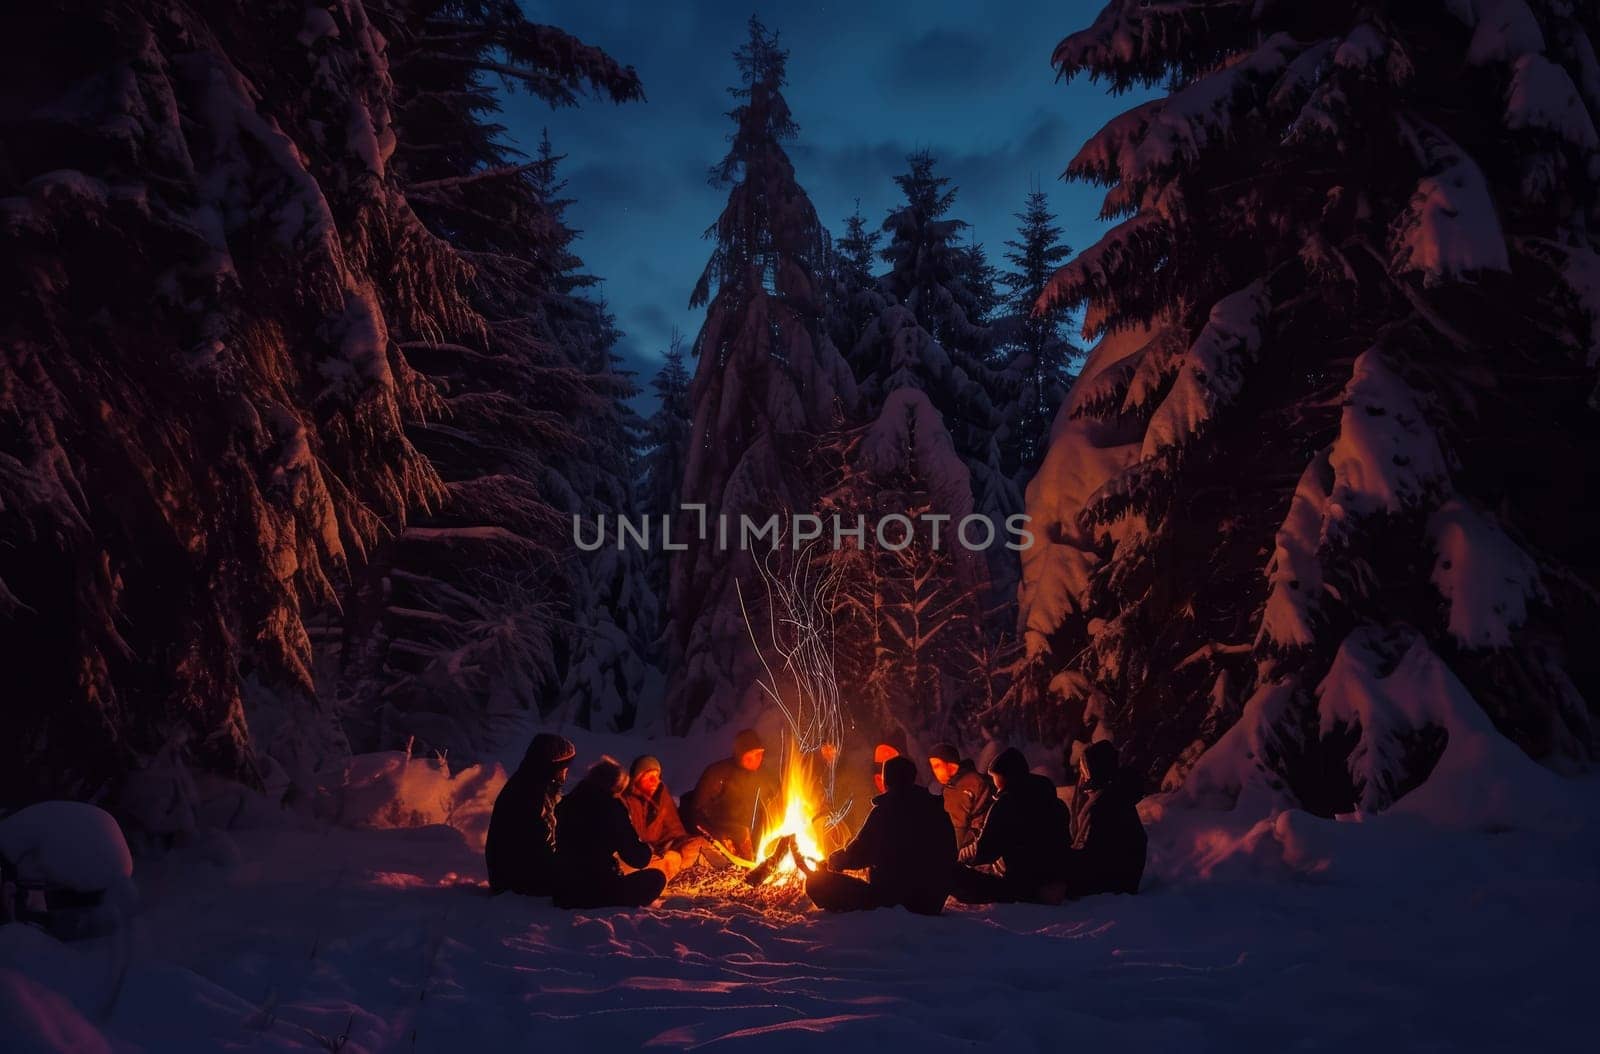 Group of People Sitting Around Fire in Snow by gcm